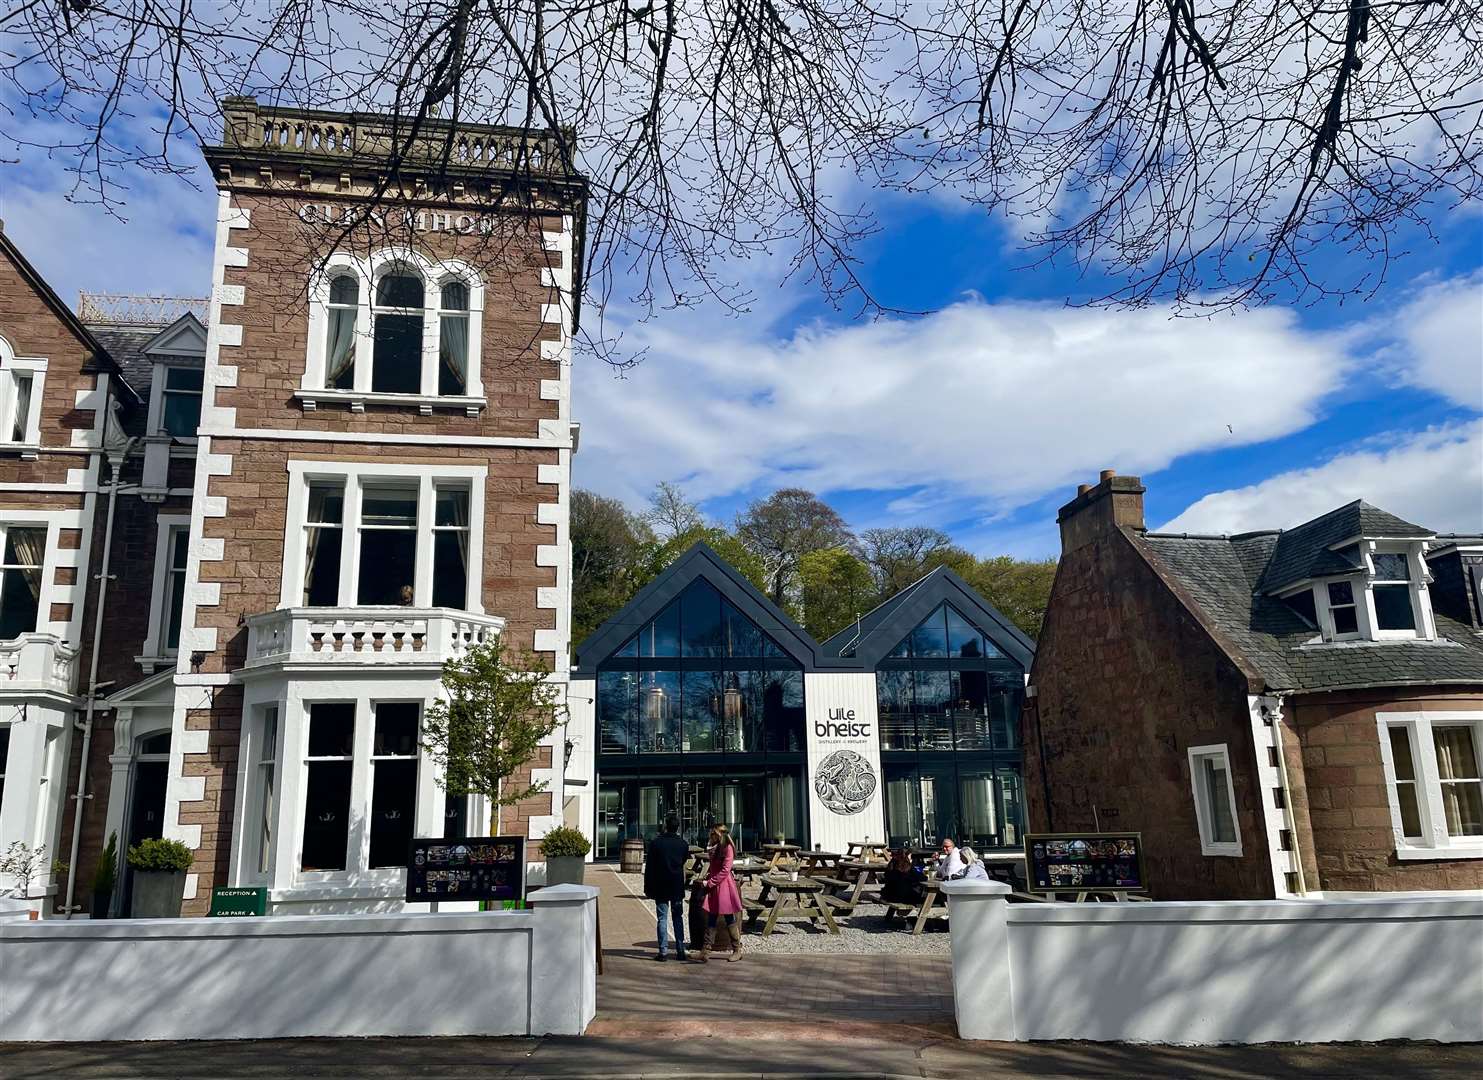 The Glen Mhor Hotel on Ness Bank, Inverness, incorporating the new Uile-bheist Distillery and Brewery.